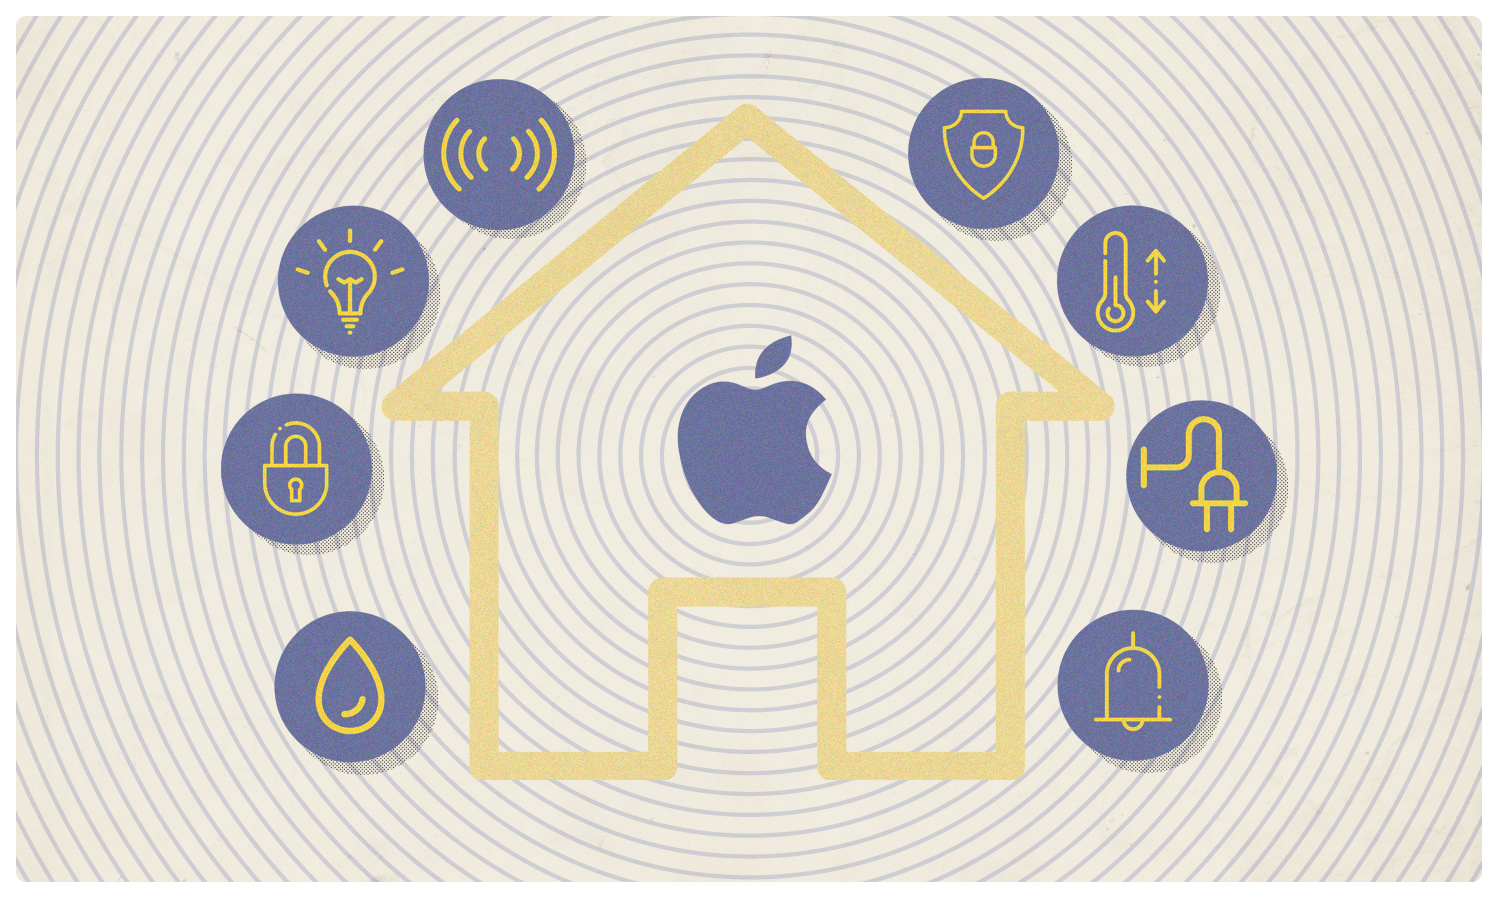 What are the options for an Apple HomeKit home hub? An expert's